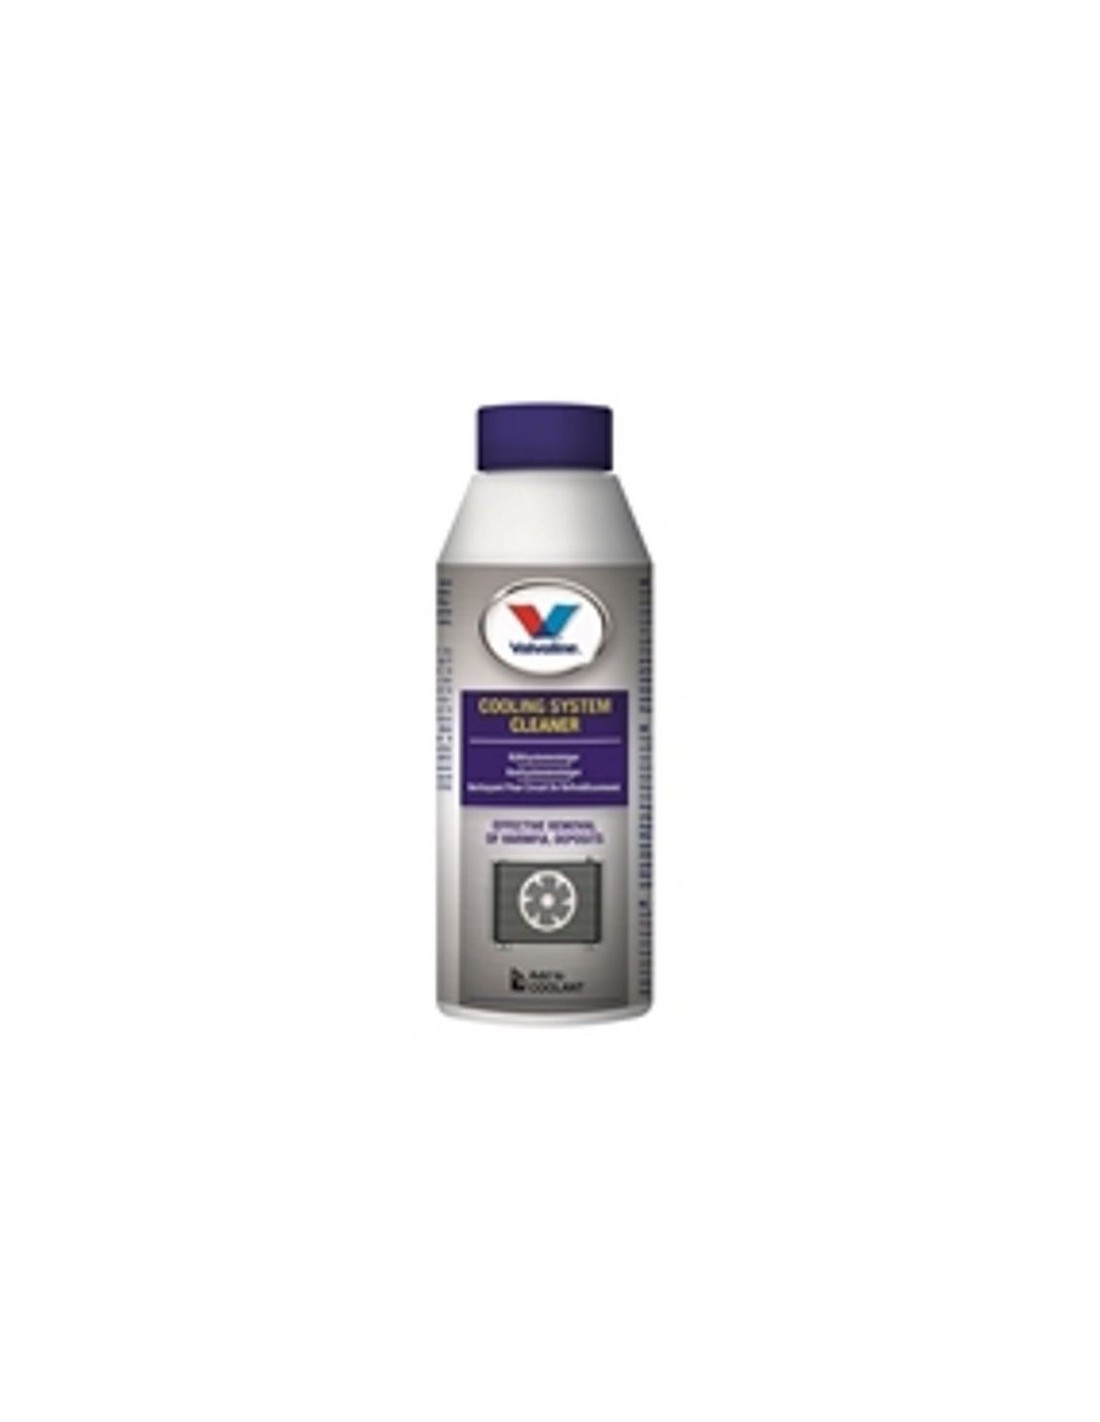 Cooling System Cleaner, Valvoline250 ml - 7.95€-   Capacidad 250 ml